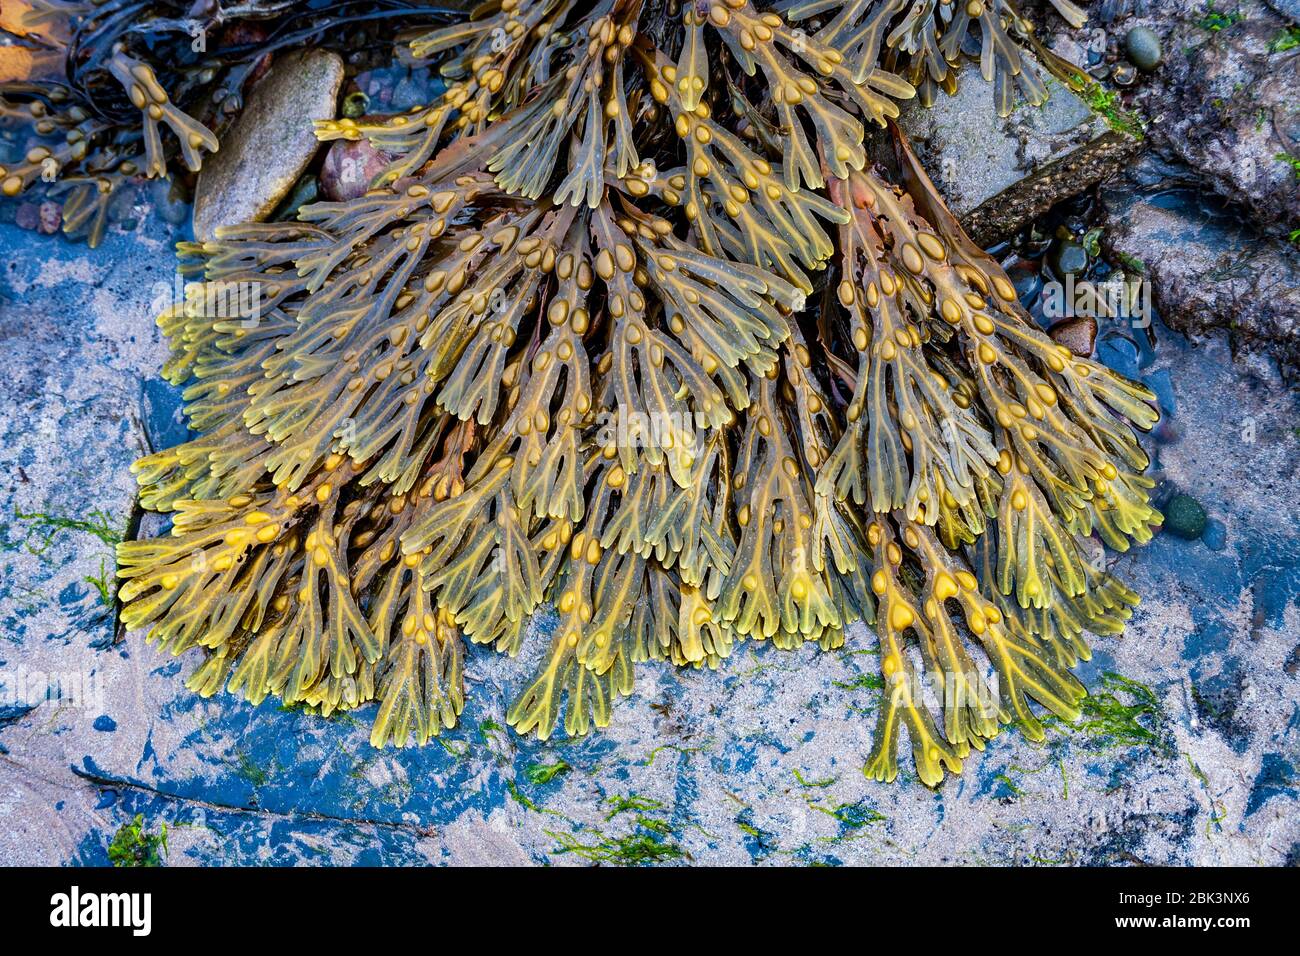 The fronds and vesicules of Bladder Wrack seawed lying on rocks on the North Sea coast, England Stock Photo